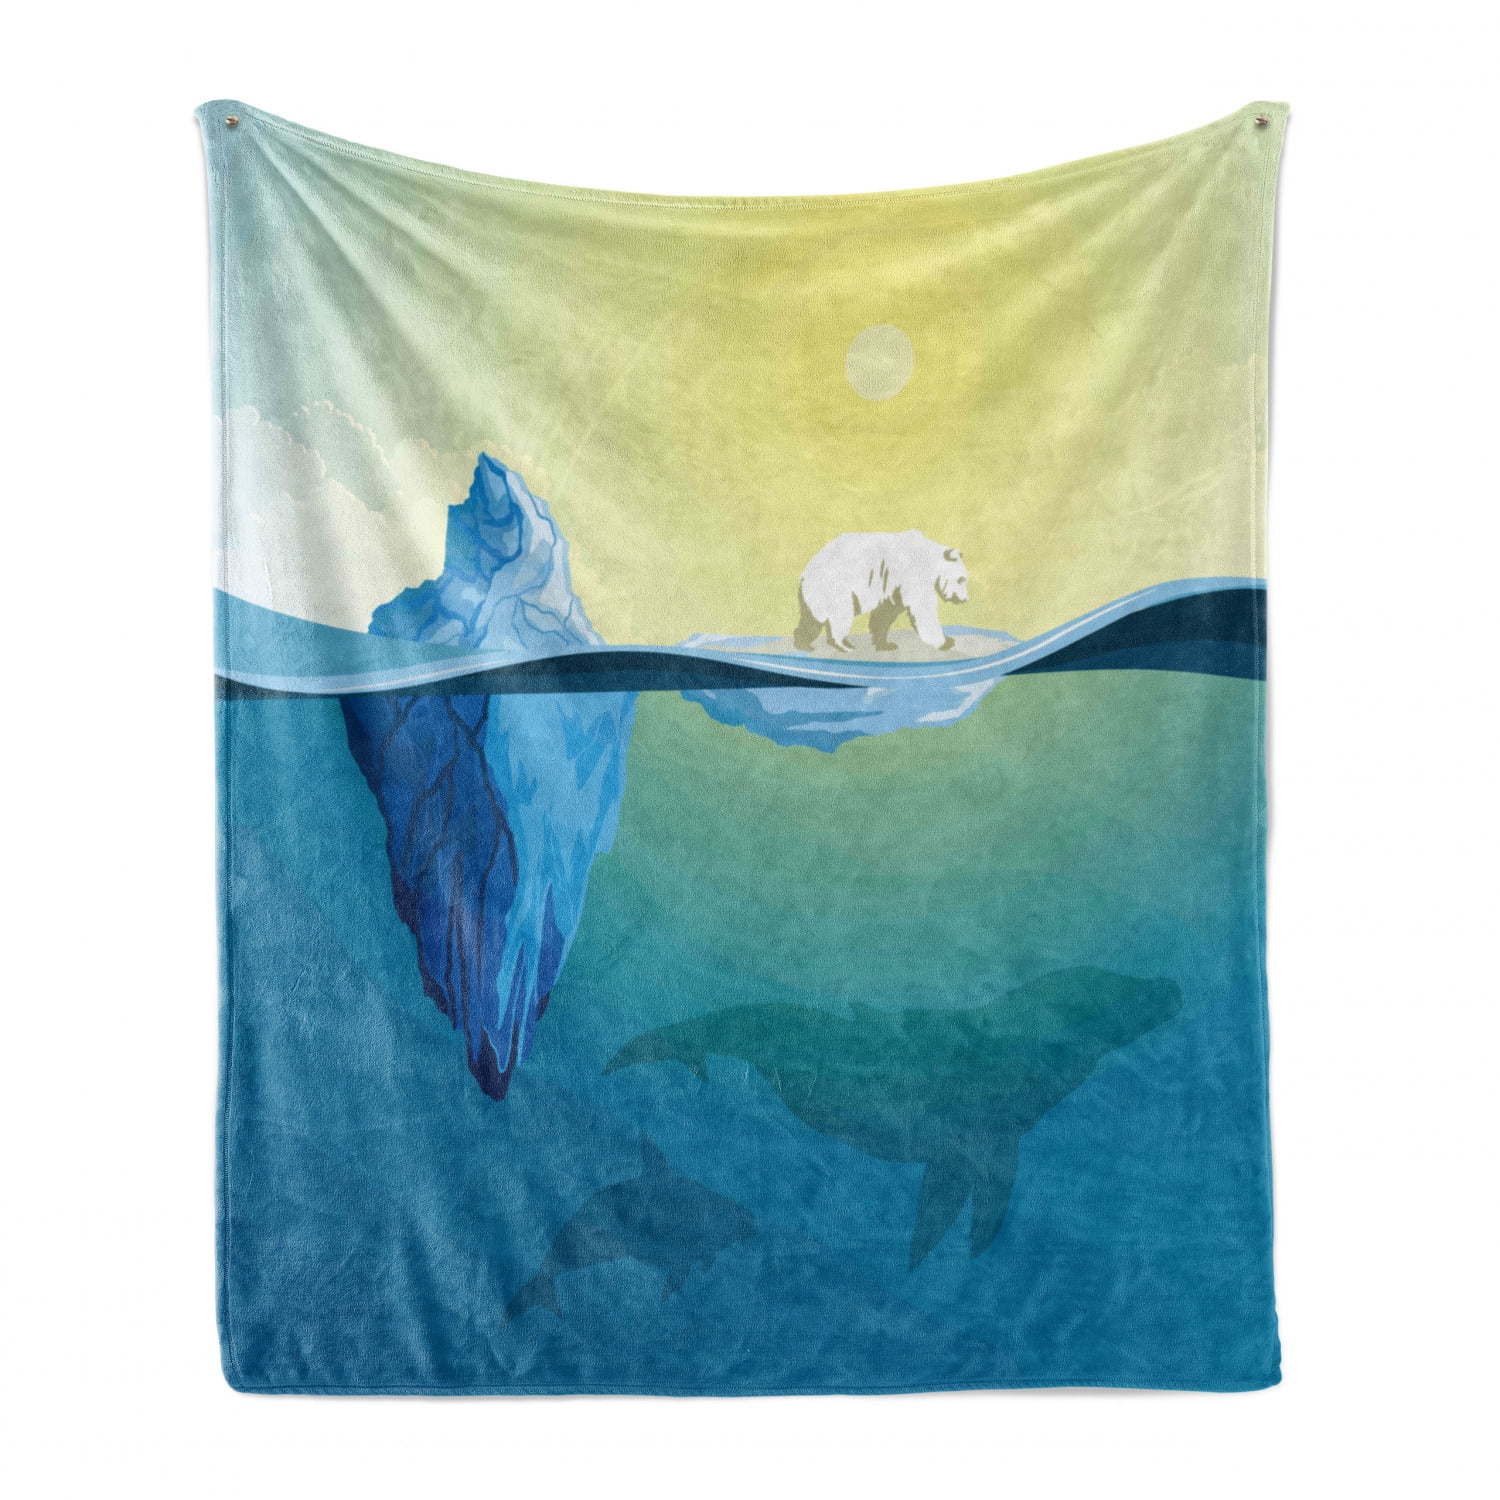 50 x 60 Cozy Plush for Indoor and Outdoor Use Polar Bear Standing on an Ice Floe Melting in Ocean with Swimming Whales Theme Ambesonne Polar Bear Soft Flannel Fleece Throw Blanket Multicolor 